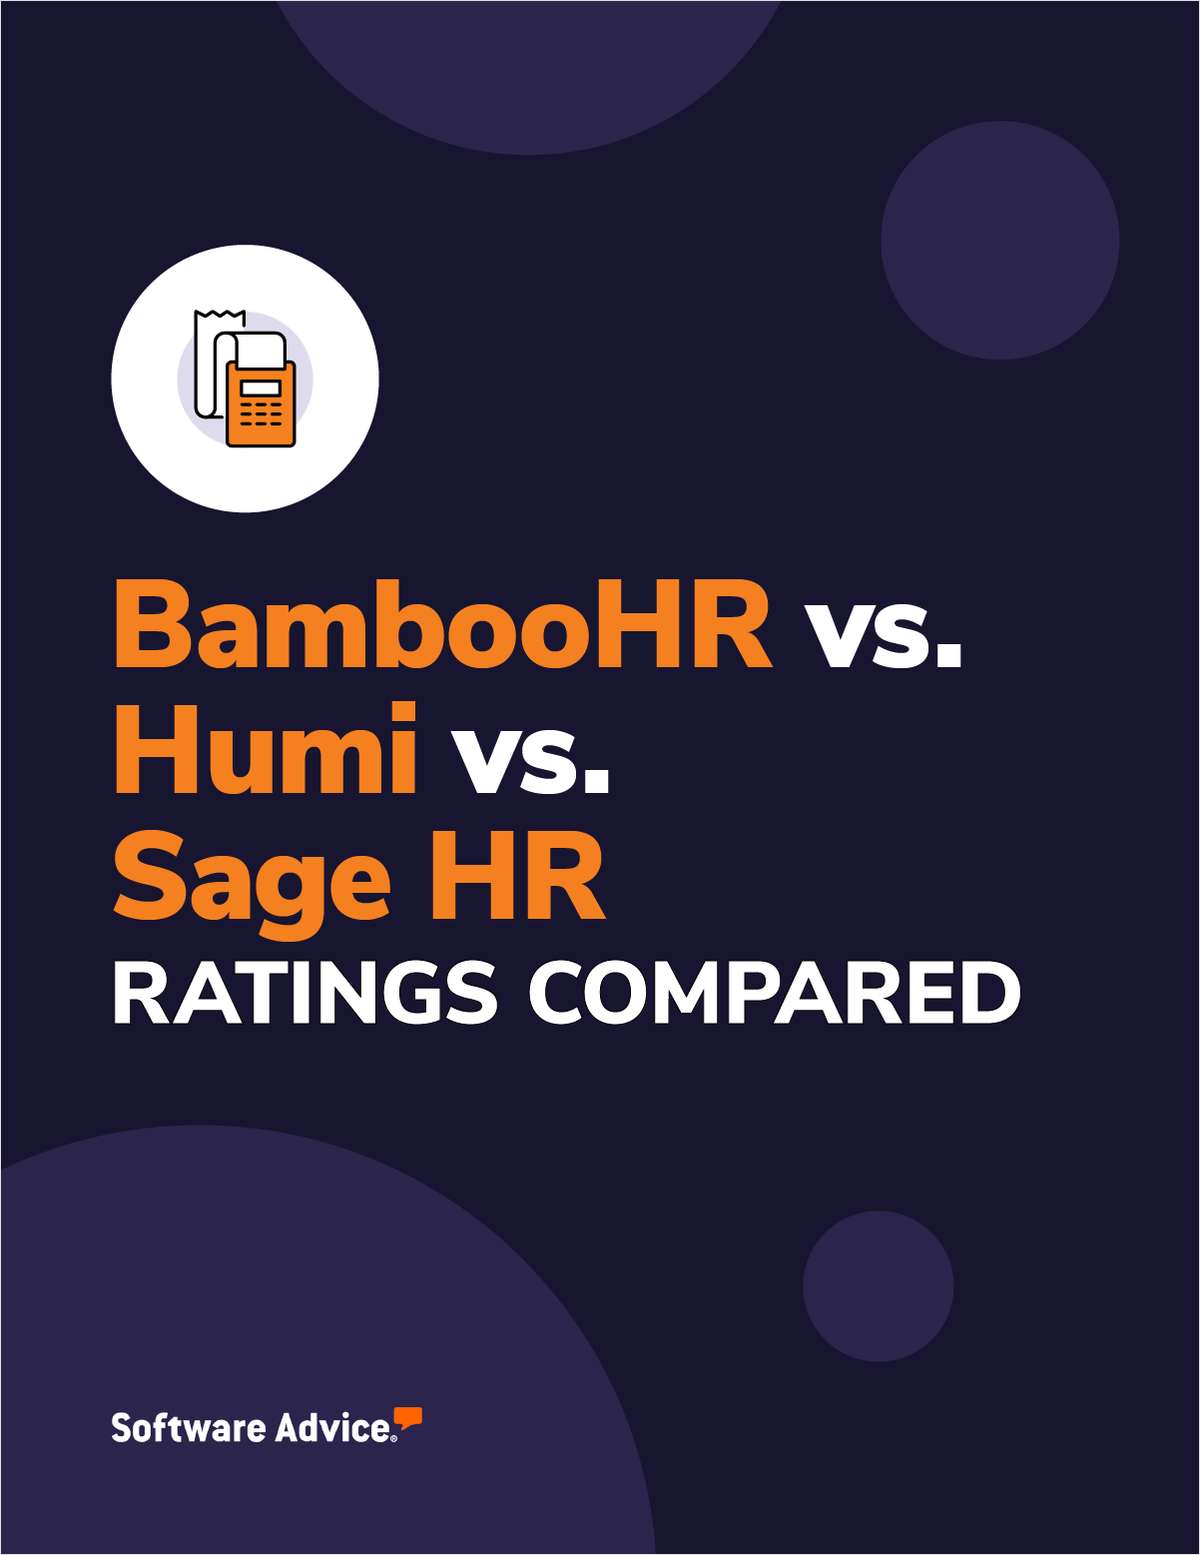 BambooHR vs. Humi vs. Sage HR Ratings Compared